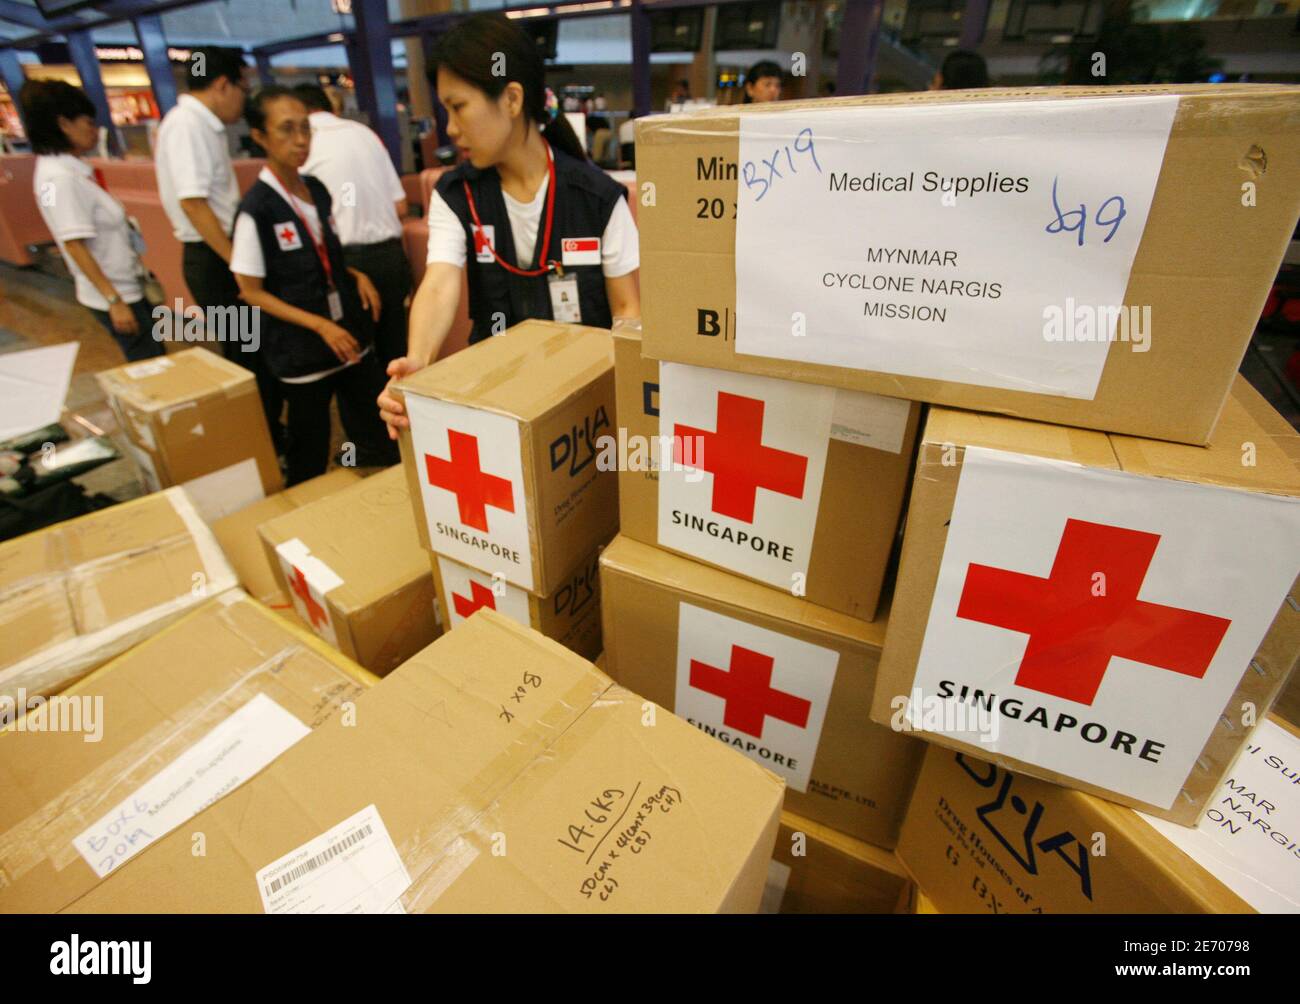 Members of the Singapore Red Cross prepare to leave for Myanmar with  S$20,000 ($14,710) worth of medical aid at Singapore's Changi Airport May  23, 2008. The team is the first group of